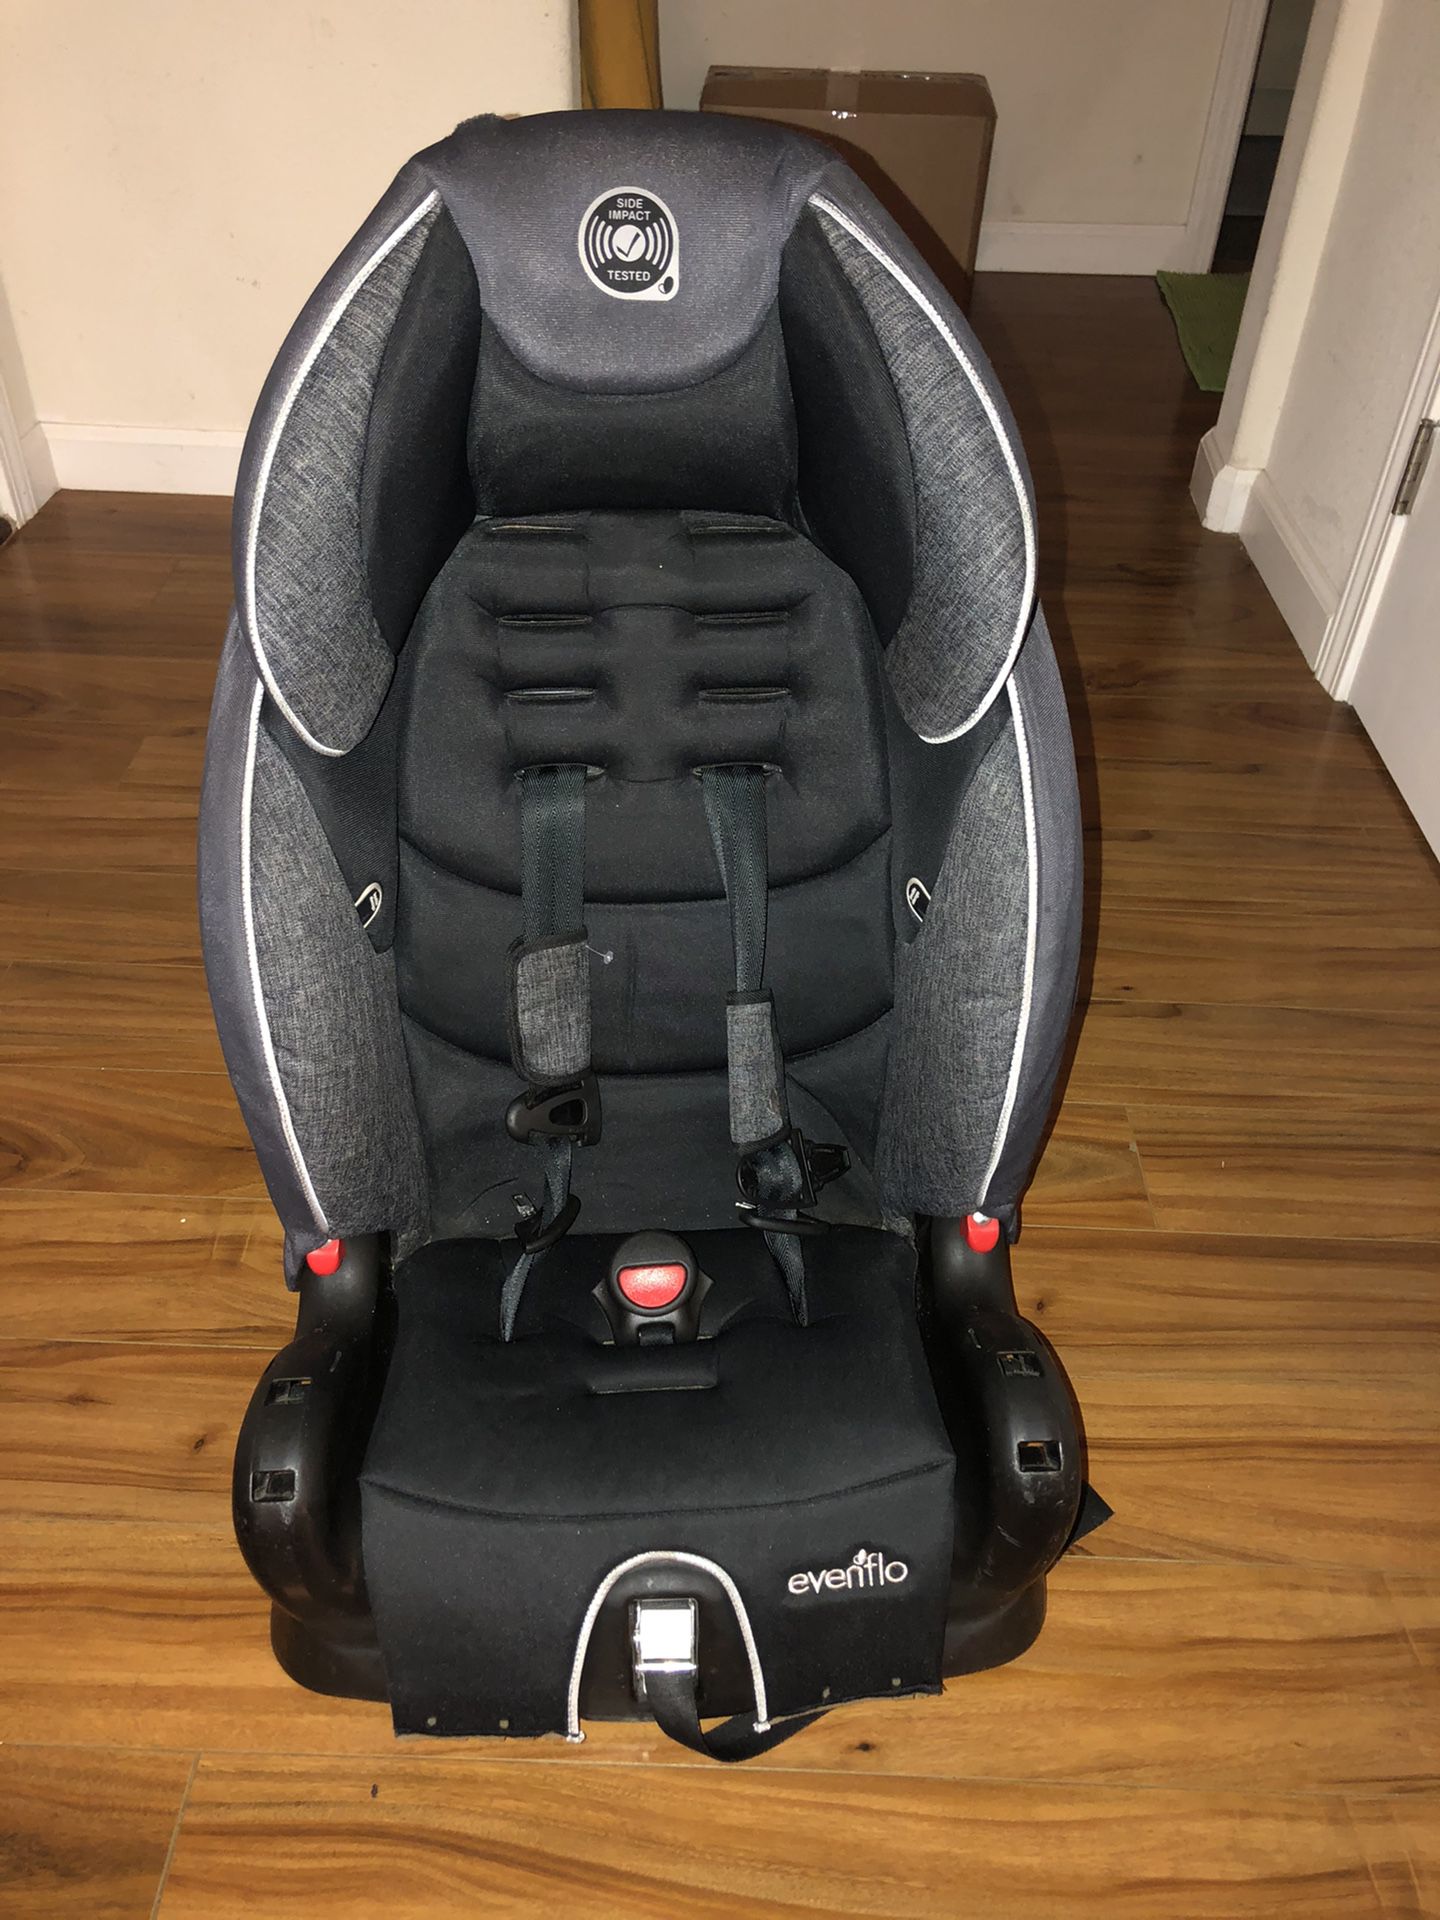 Evenflo car seat for free